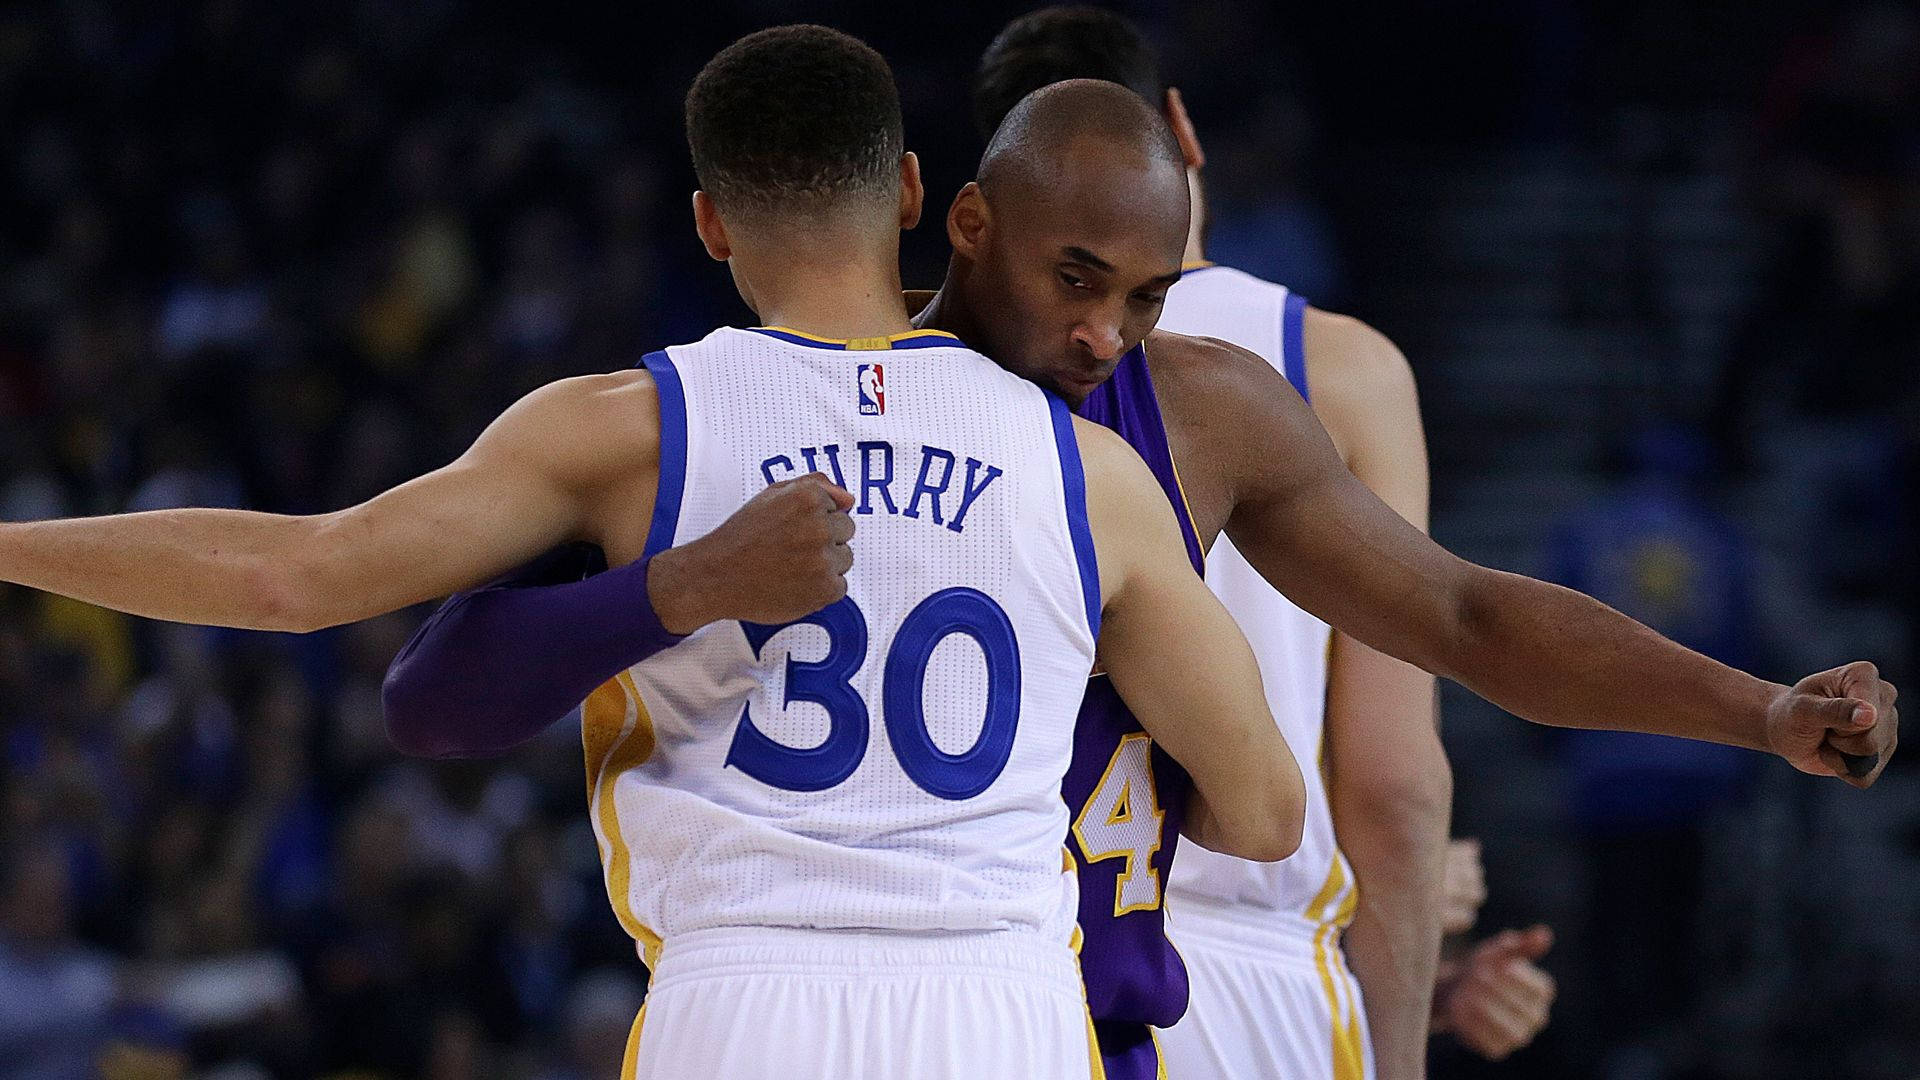 Download Kobe Bryant And Stephen Curry Wallpaper